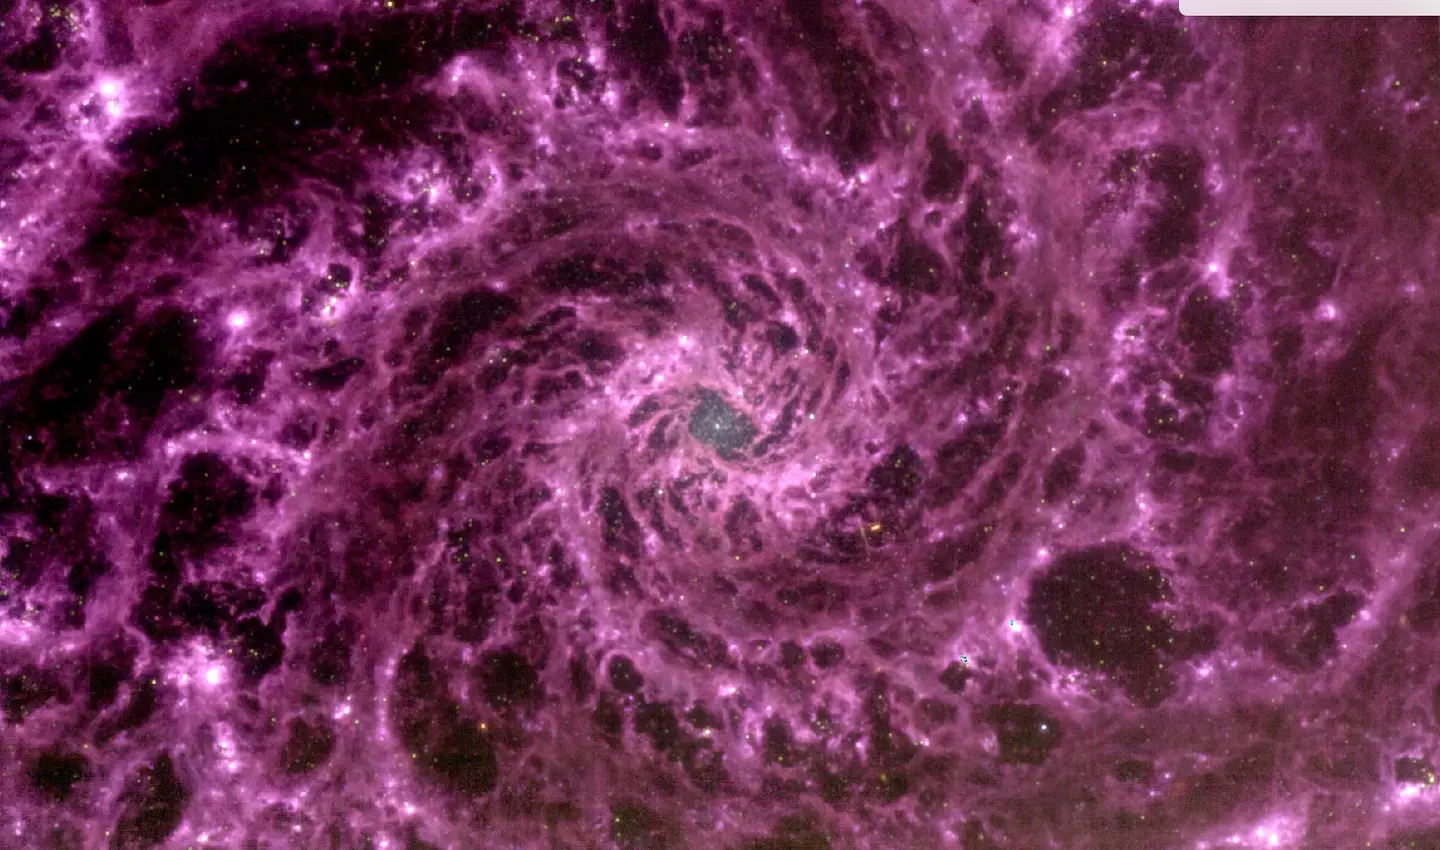 A mid-infrared image of the galaxy NGC 628.